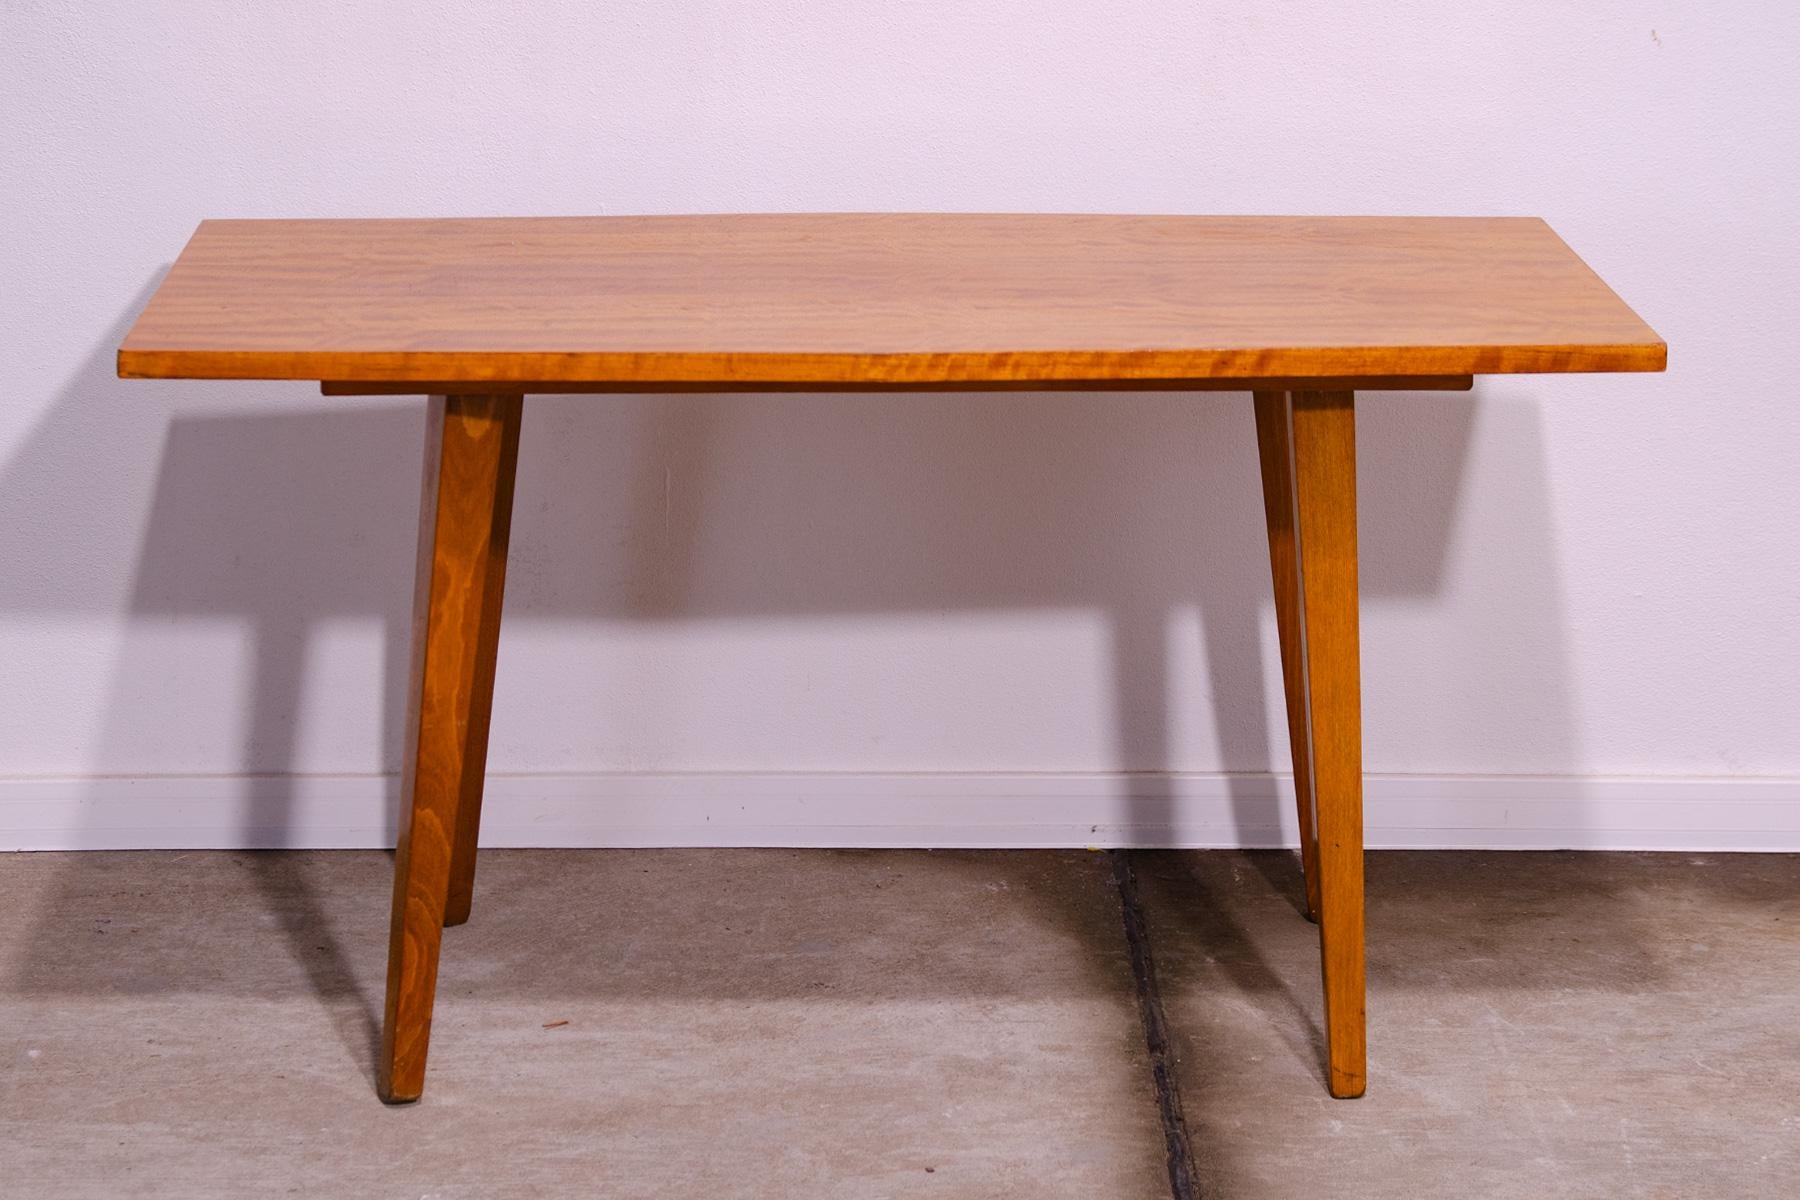 Modern occasional midcentury coffee table designed by František Jirák for Tatra nábytok, it was made in the 1960´s in the former Czechoslovakia.

It´s made of beech wood. In good Vintage condition, shows signs of age and use.

Dimensions:

Length: